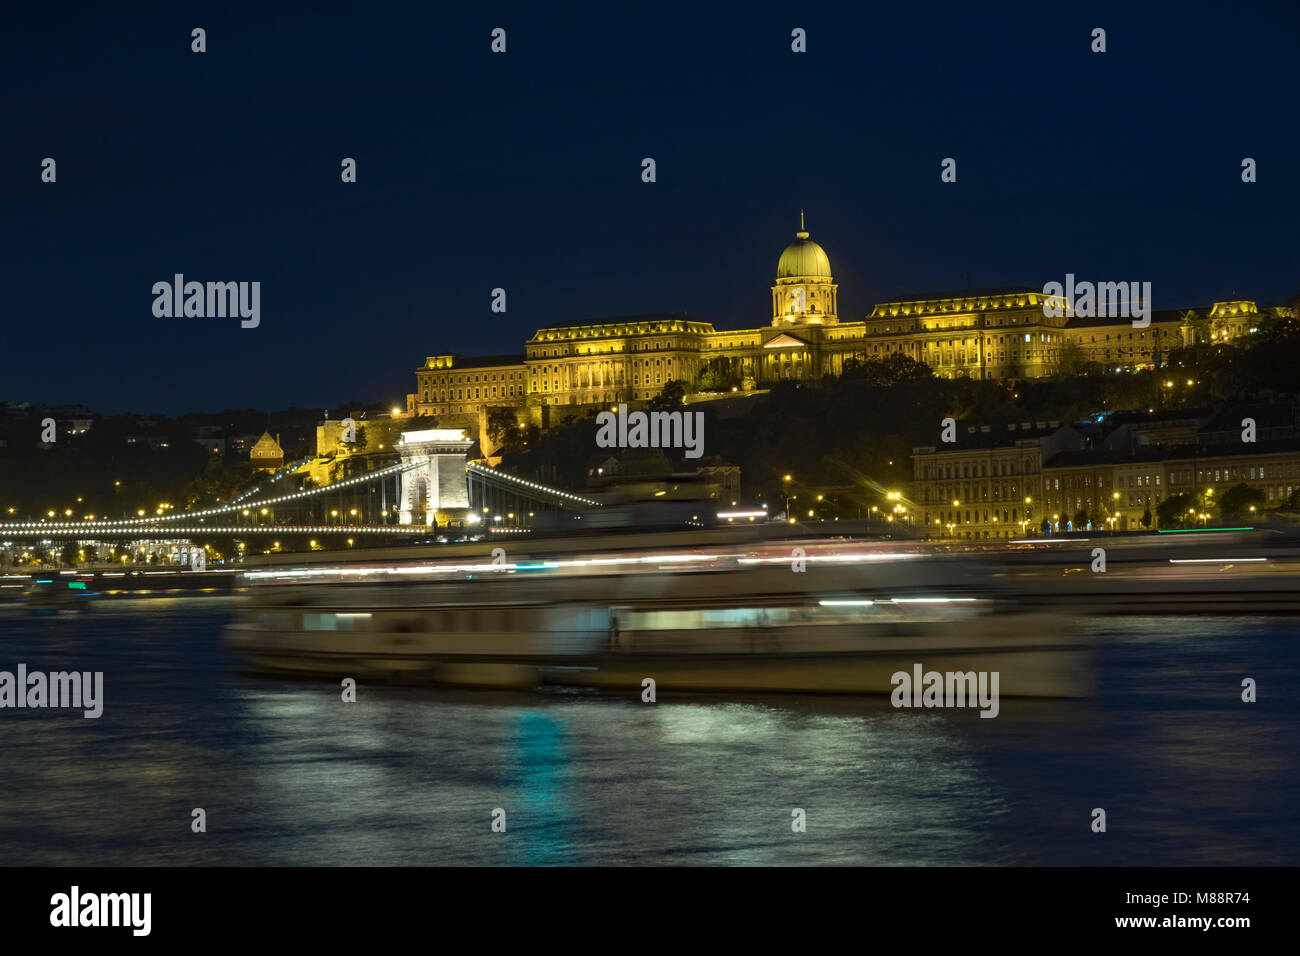 Static twilight shot of Budapest Castle and Chain Bridge lit up at night as a boat passes Stock Photo